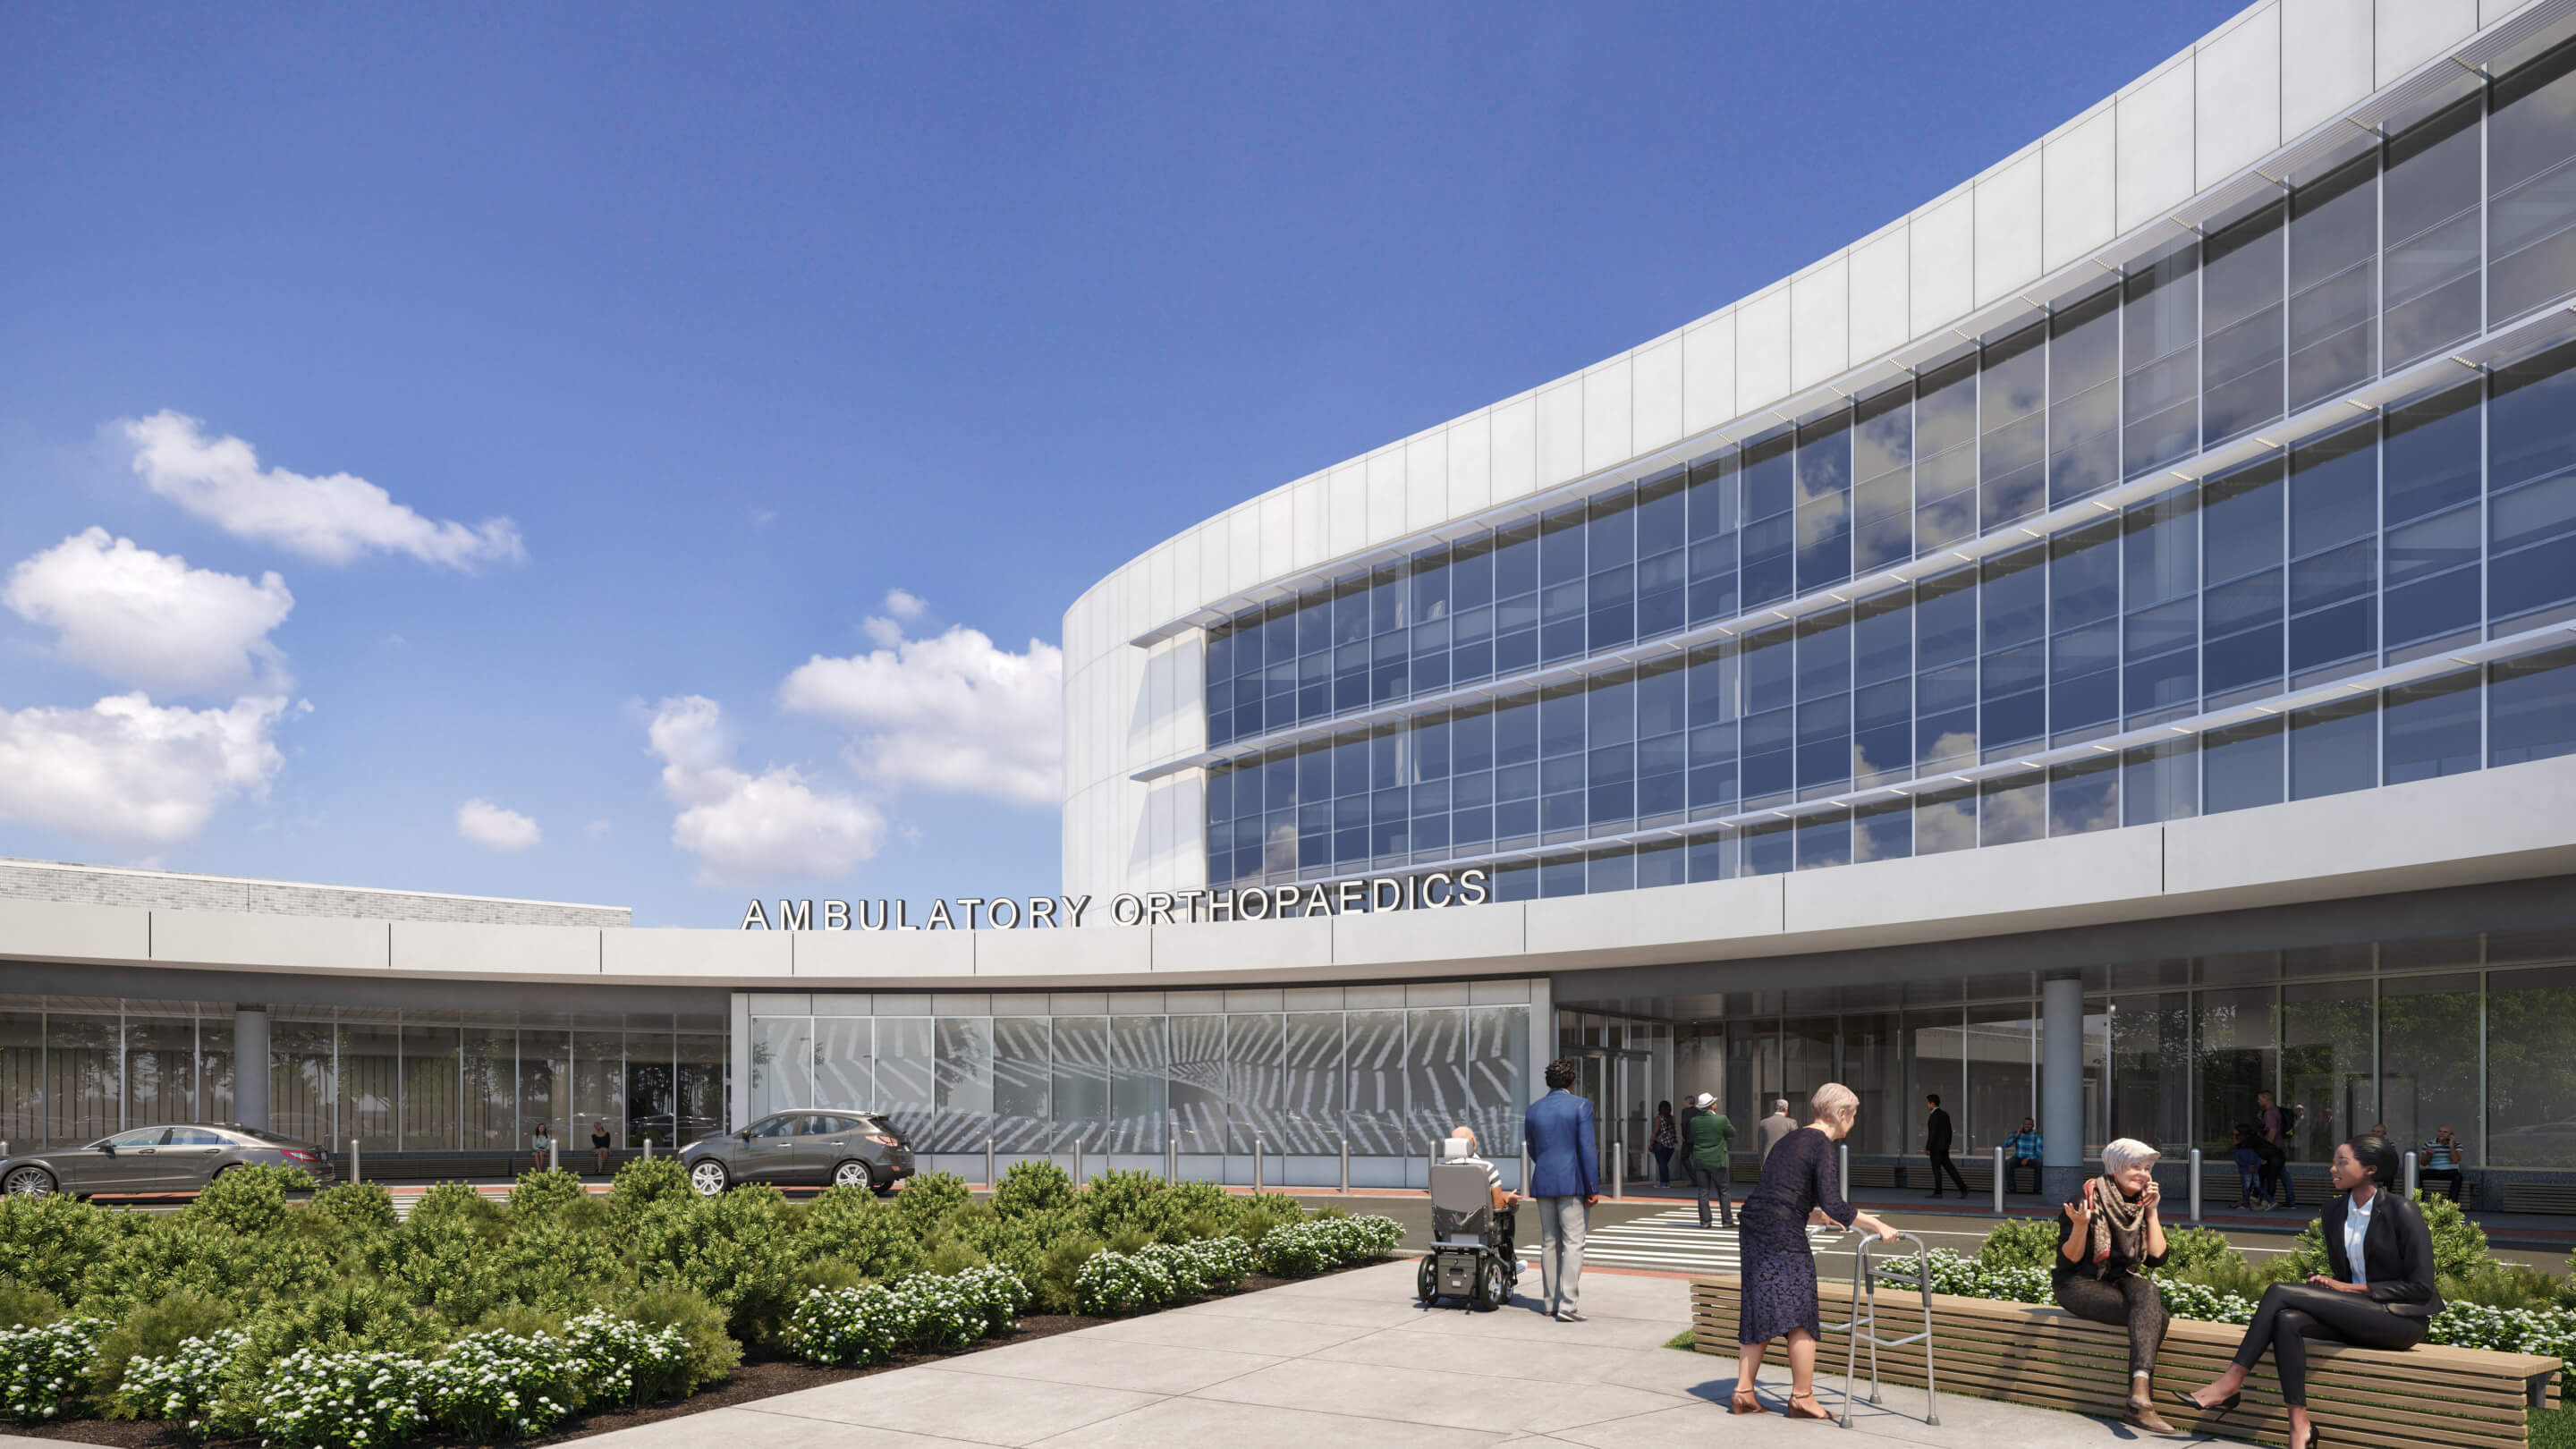 exterior rendering of entrance to an ambulatory care center